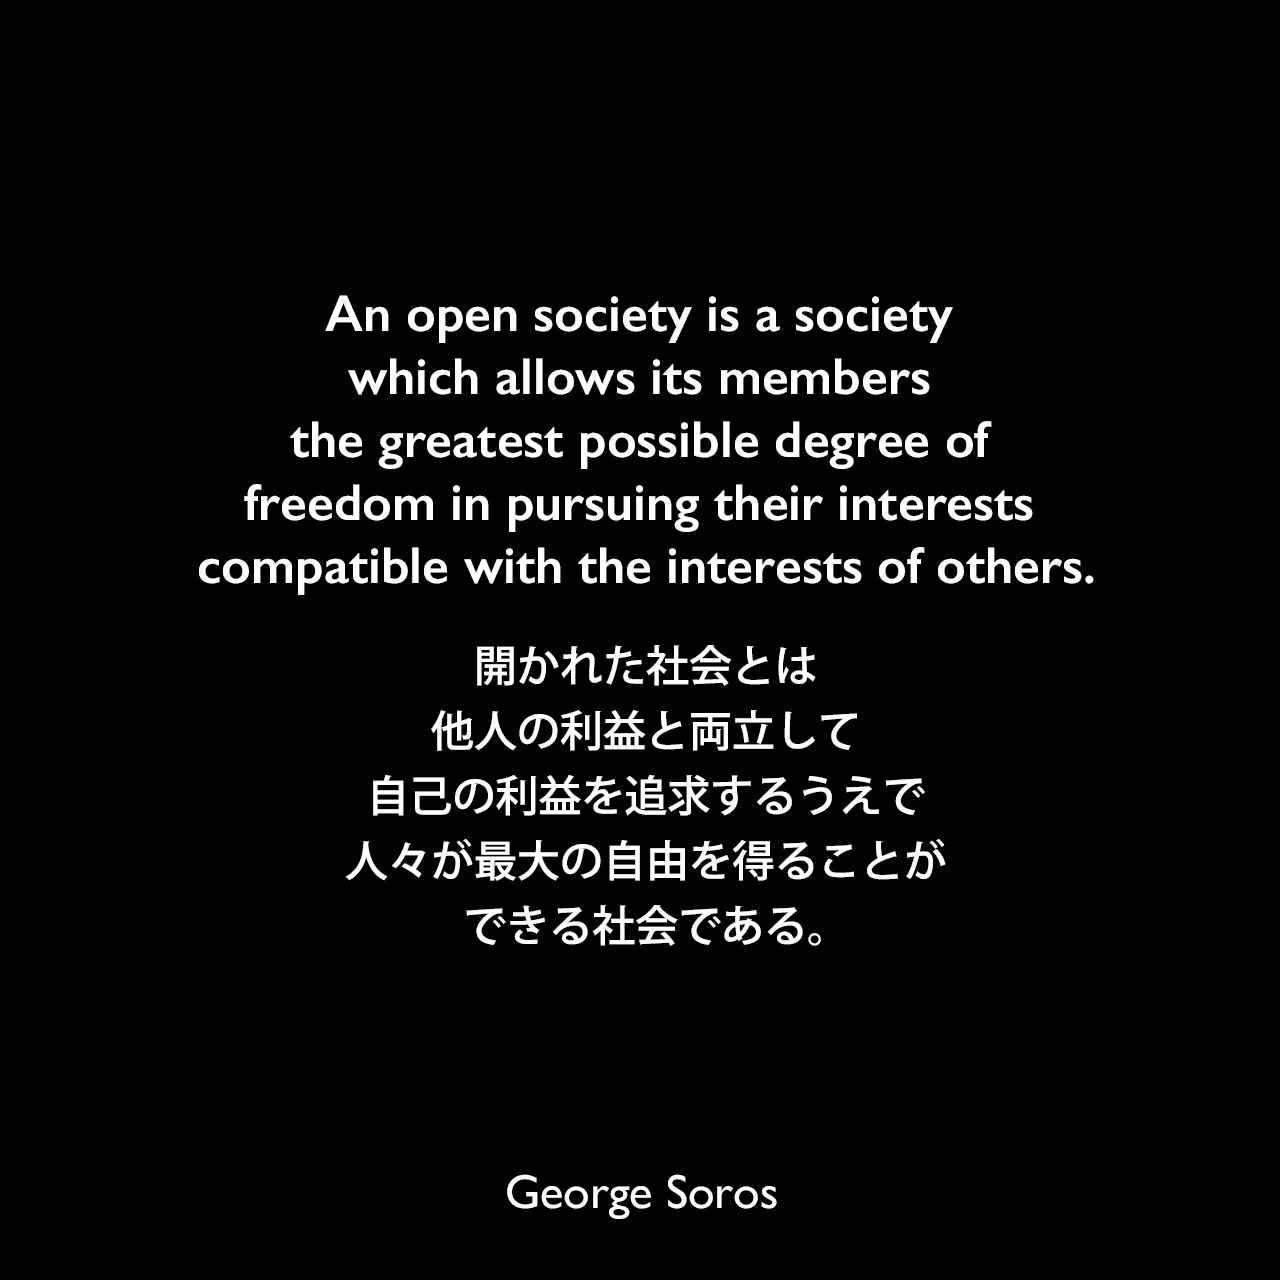 An open society is a society which allows its members the greatest possible degree of freedom in pursuing their interests compatible with the interests of others.開かれた社会とは、他人の利益と両立して自己の利益を追求するうえで、人々が最大の自由を得ることができる社会である。George Soros